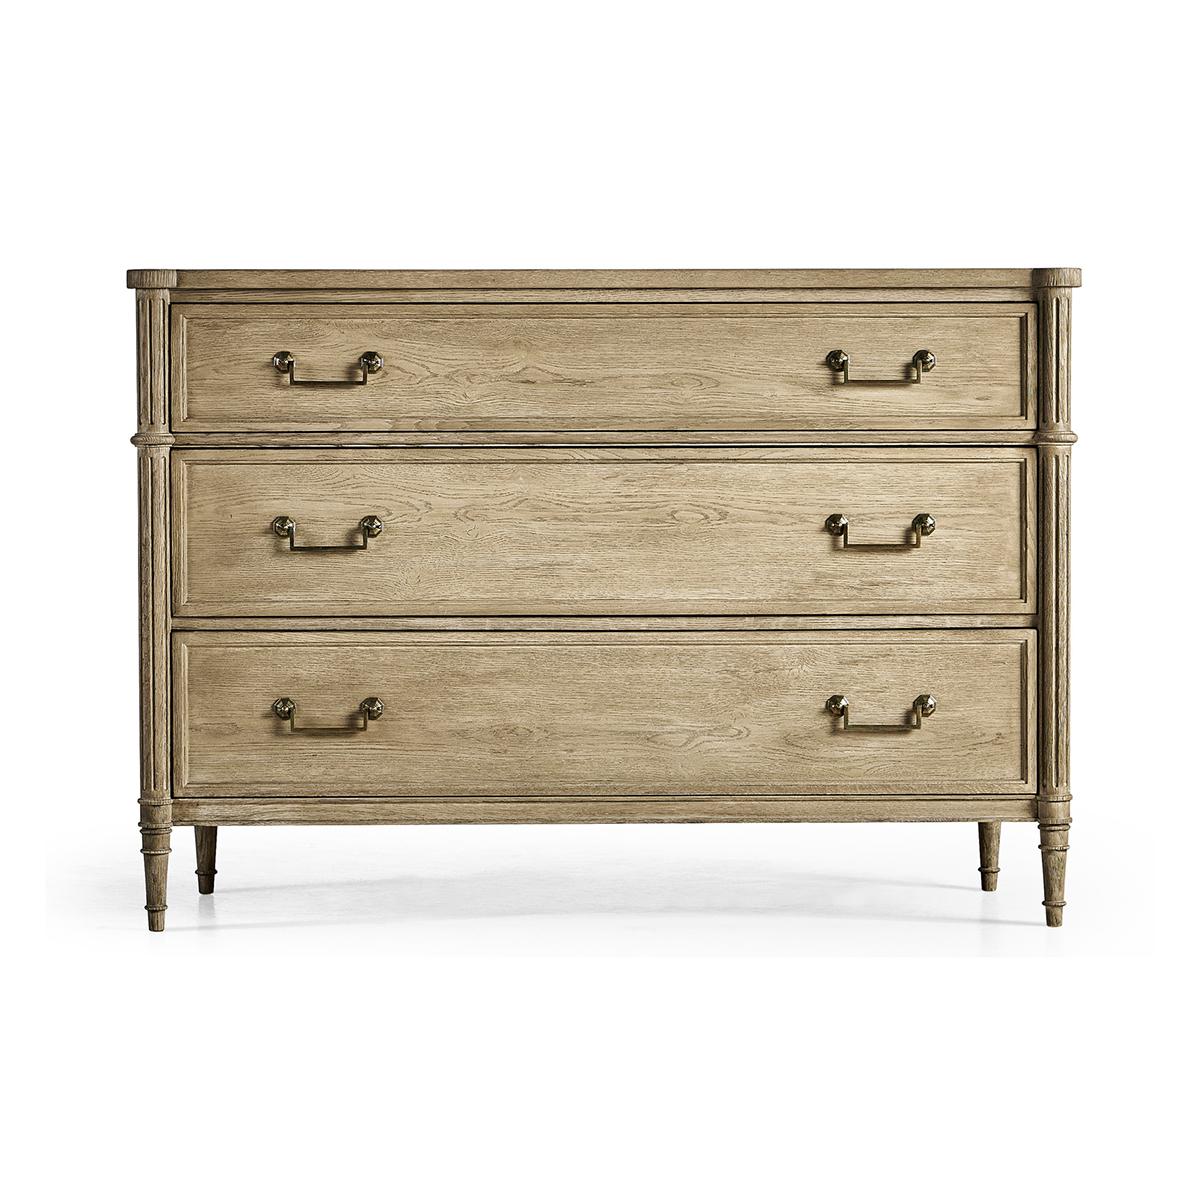 French Louis XVI Style Commode, made with chestnut in a natural stripped finish that marries effortlessly with custom-cast hardware. Turret corners, fluted styles, three long drawers and turned and tapered legs. A versatile piece that elevates both